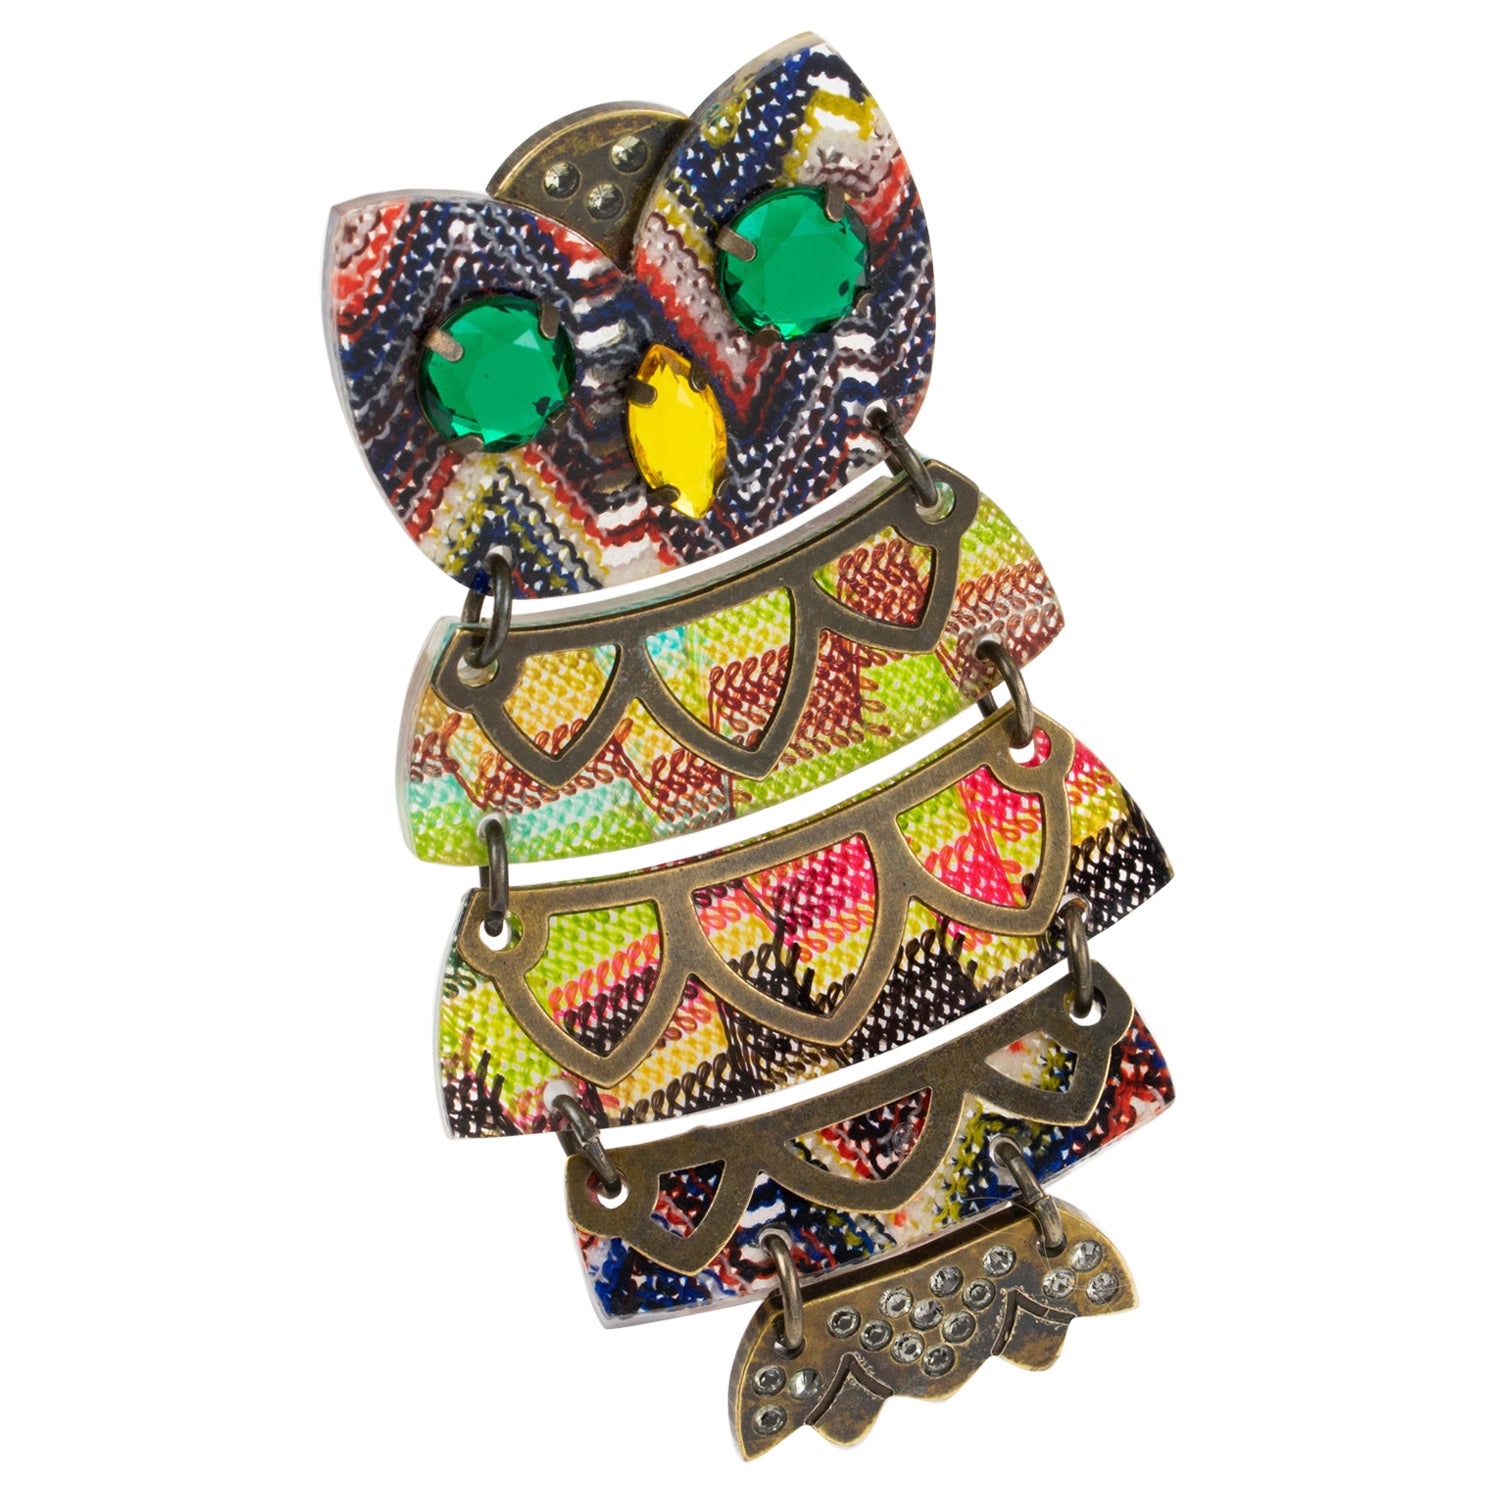 Missoni Italy Brass and Knitted Fabric Jeweled Owl Pin Brooch